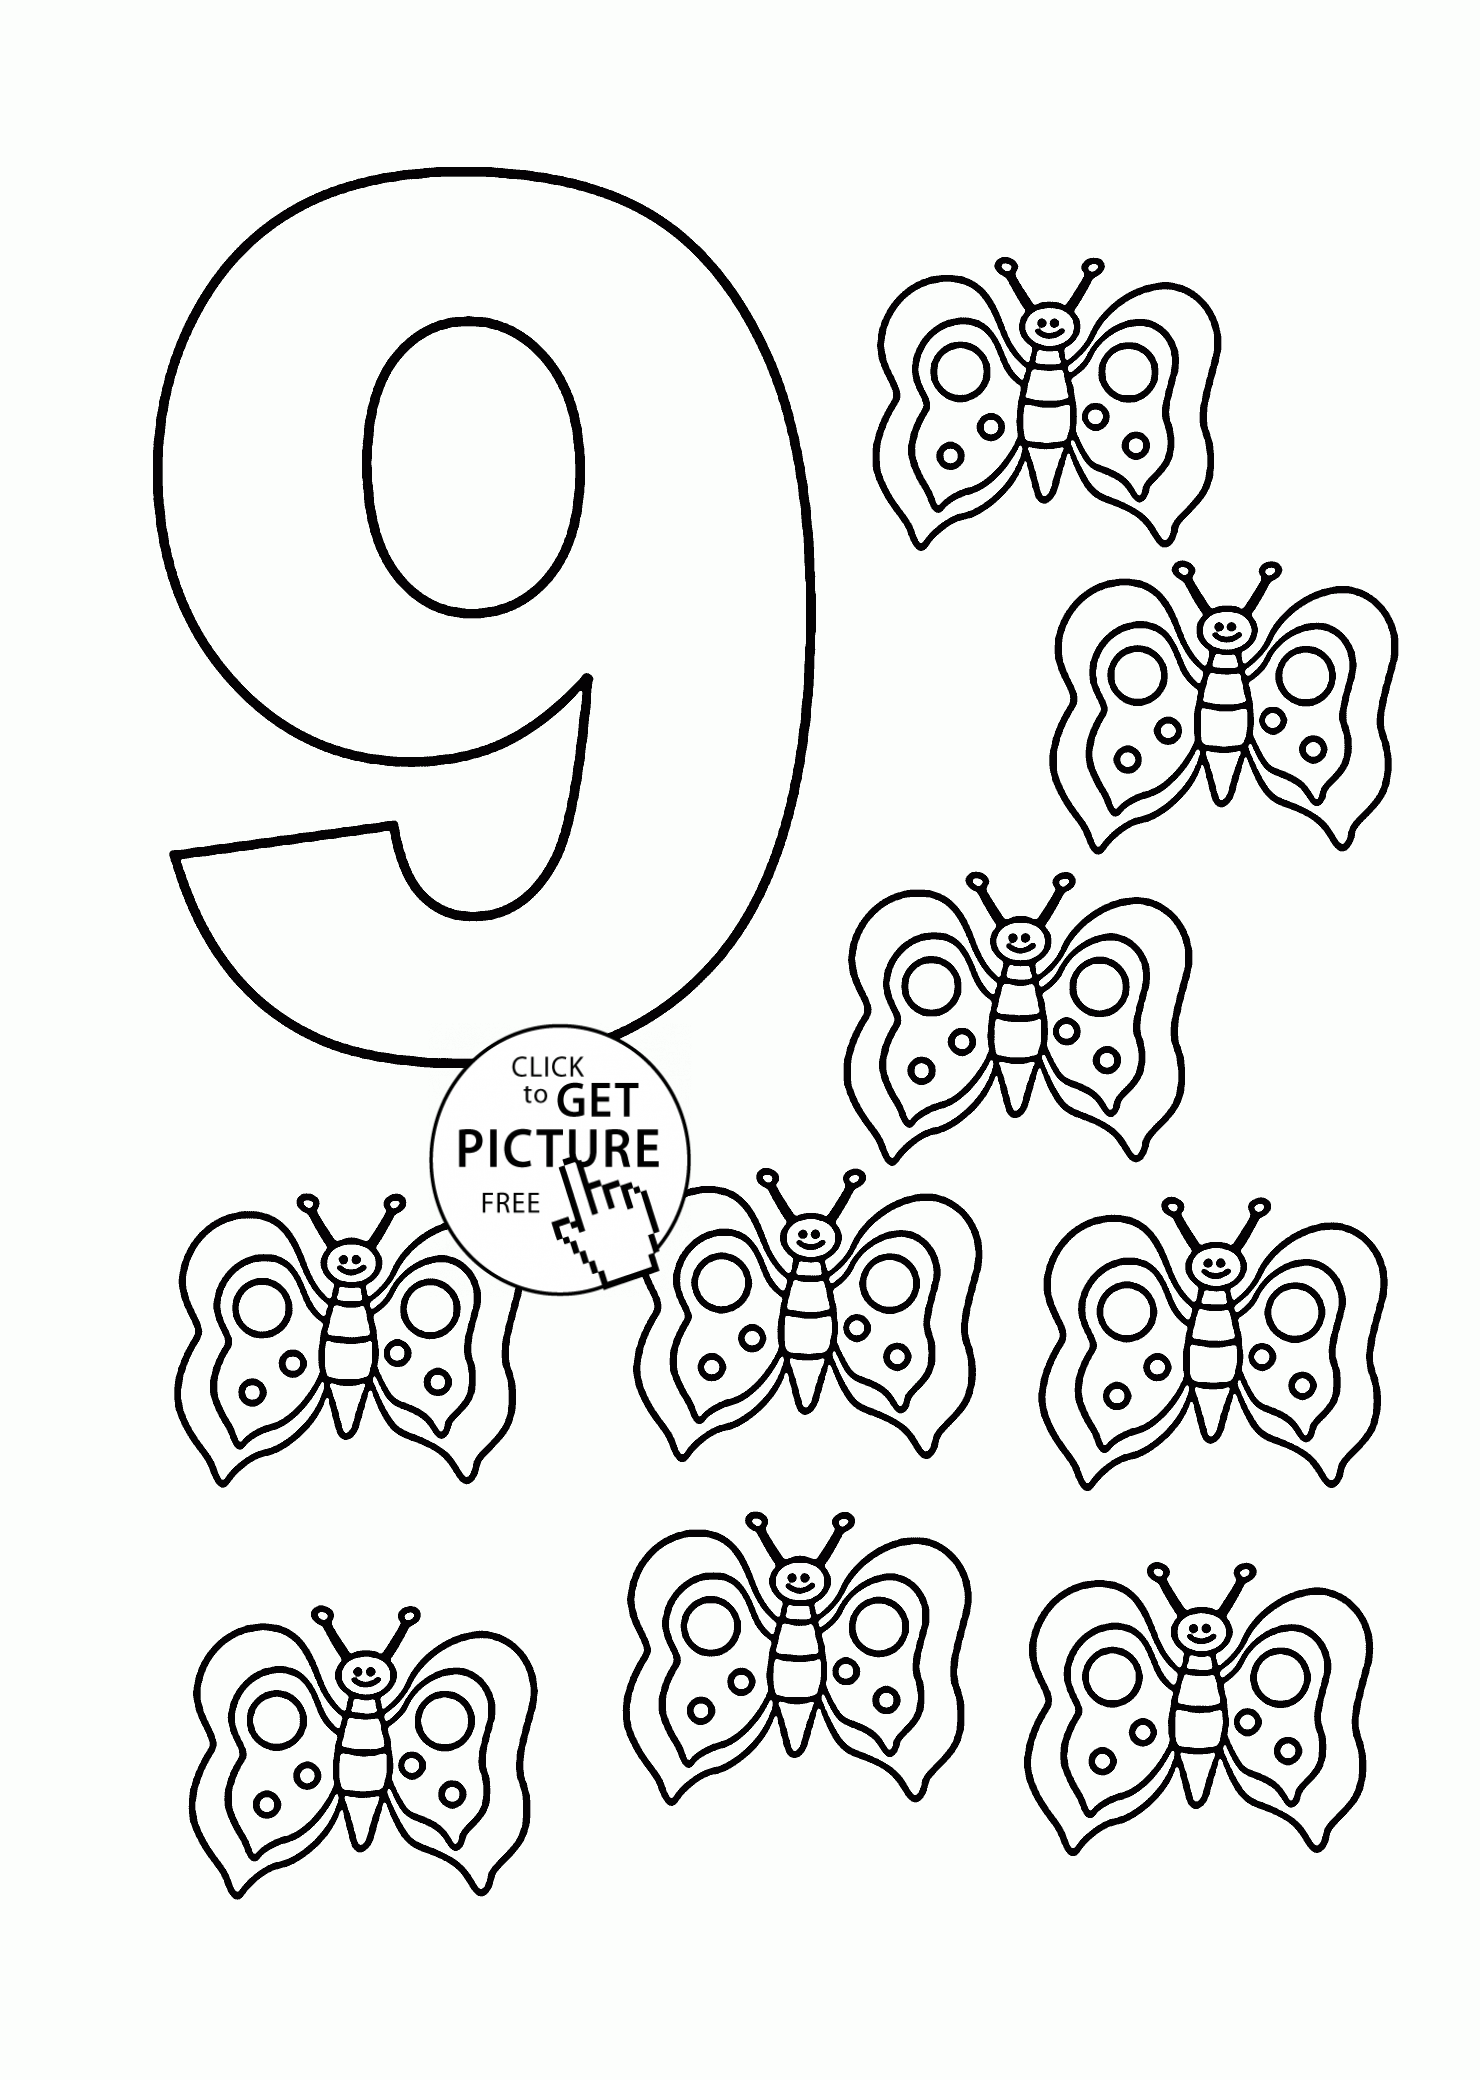 Number 9 coloring pages for kids, counting sheets printables free ...